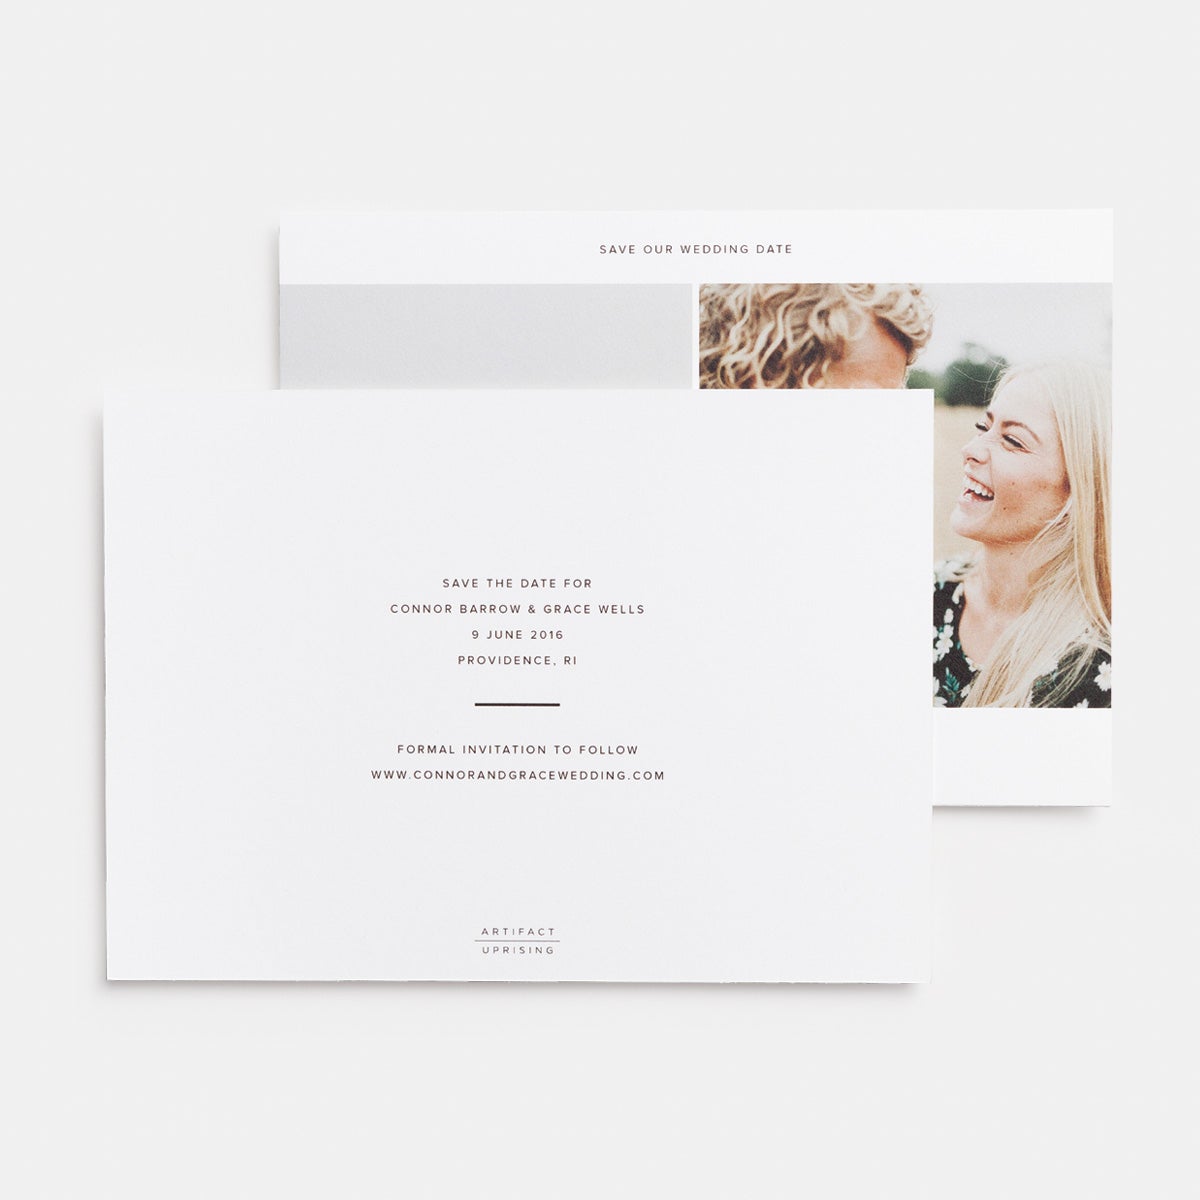 Uliana Silver Save the Date Cards Graphite Grey Save Date Save the Date Templates or Printed Save the Date Calendar Save the Date Cards